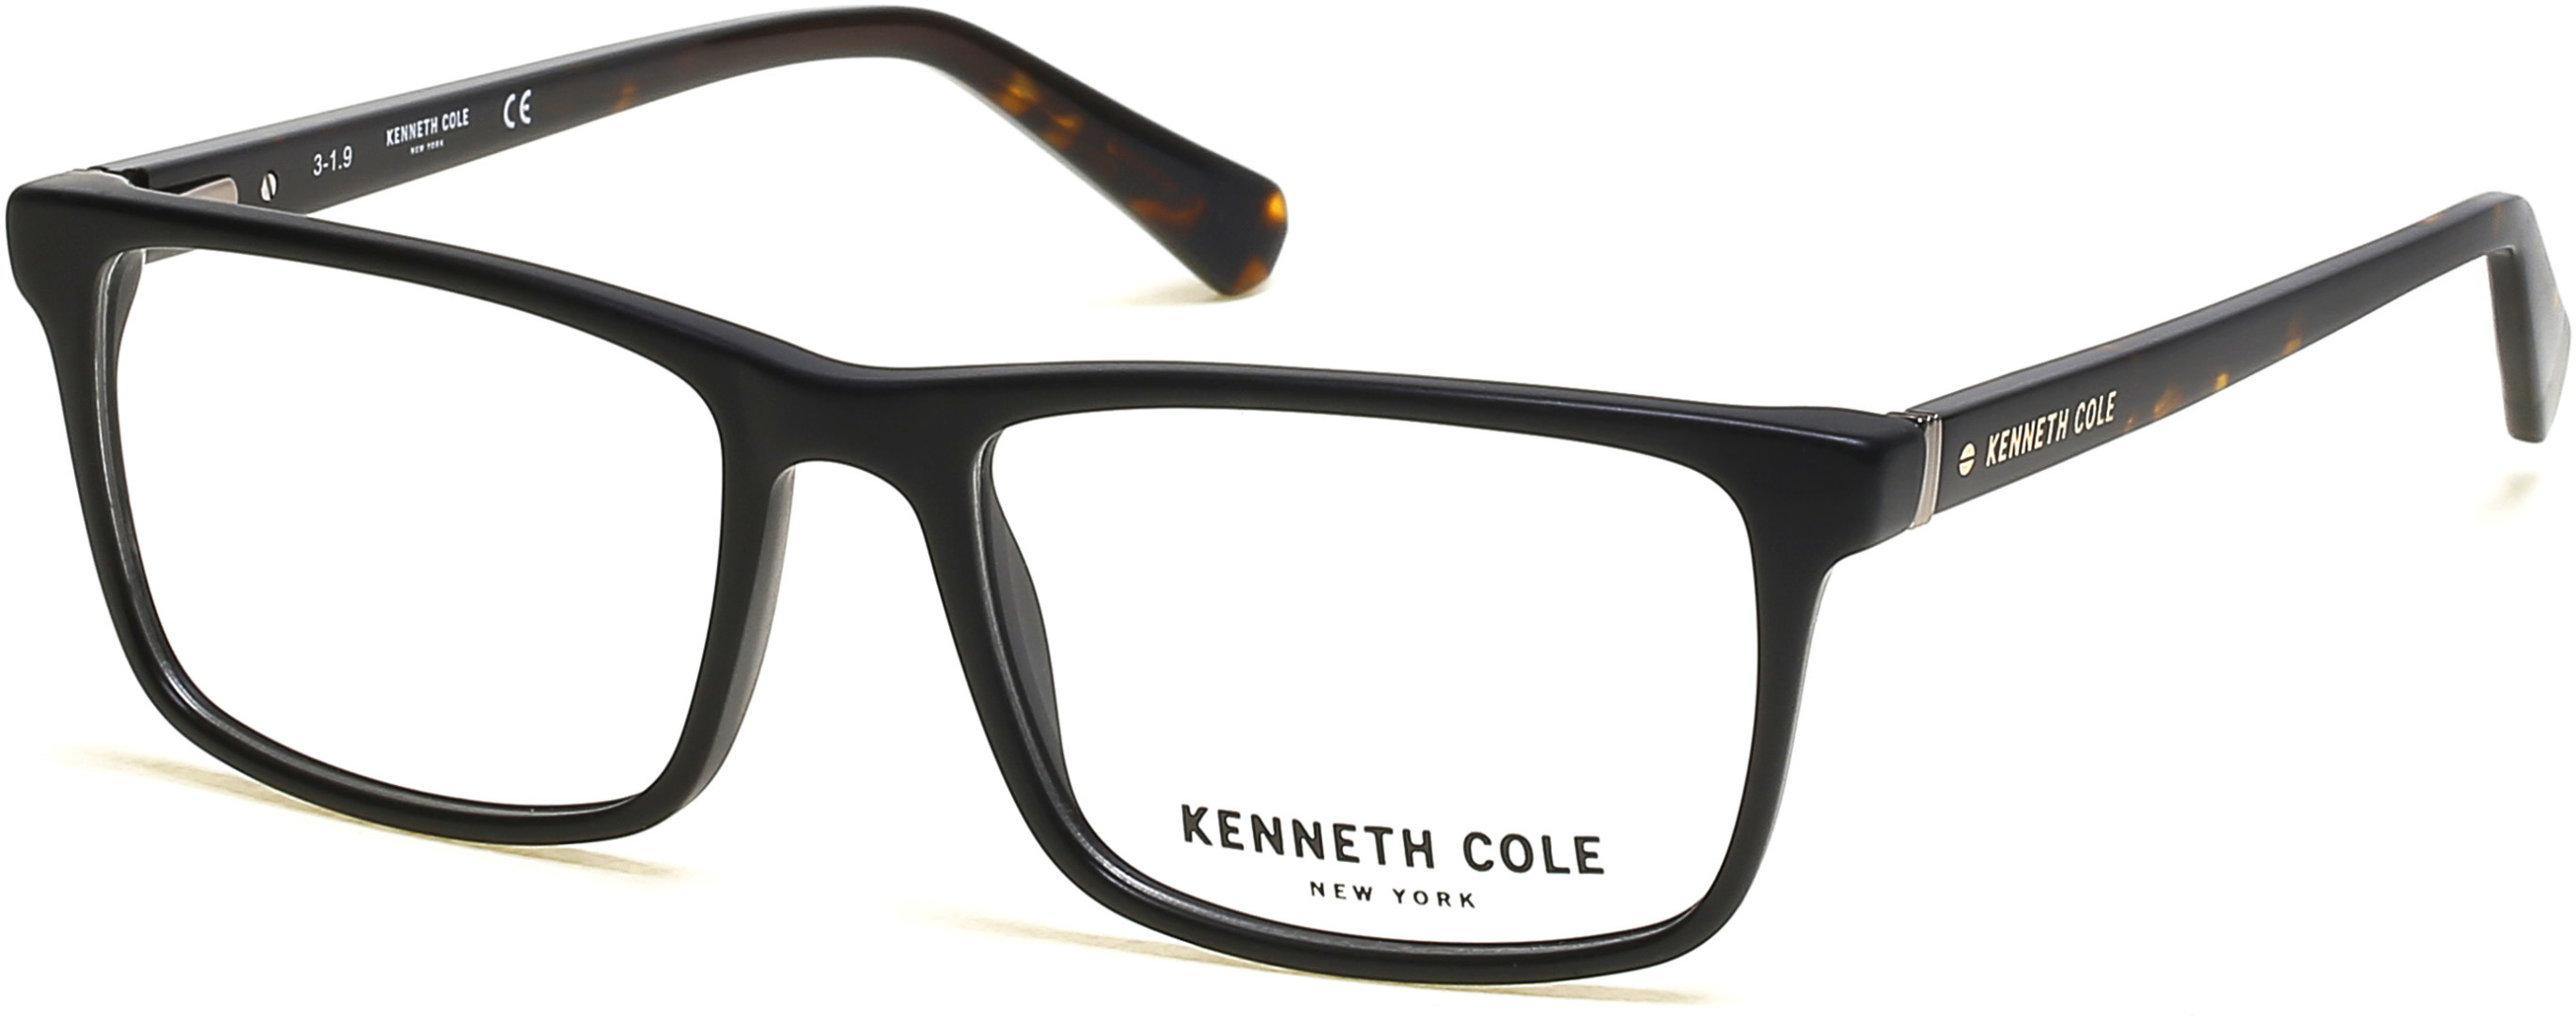 KENNETH COLE NY 0300 001